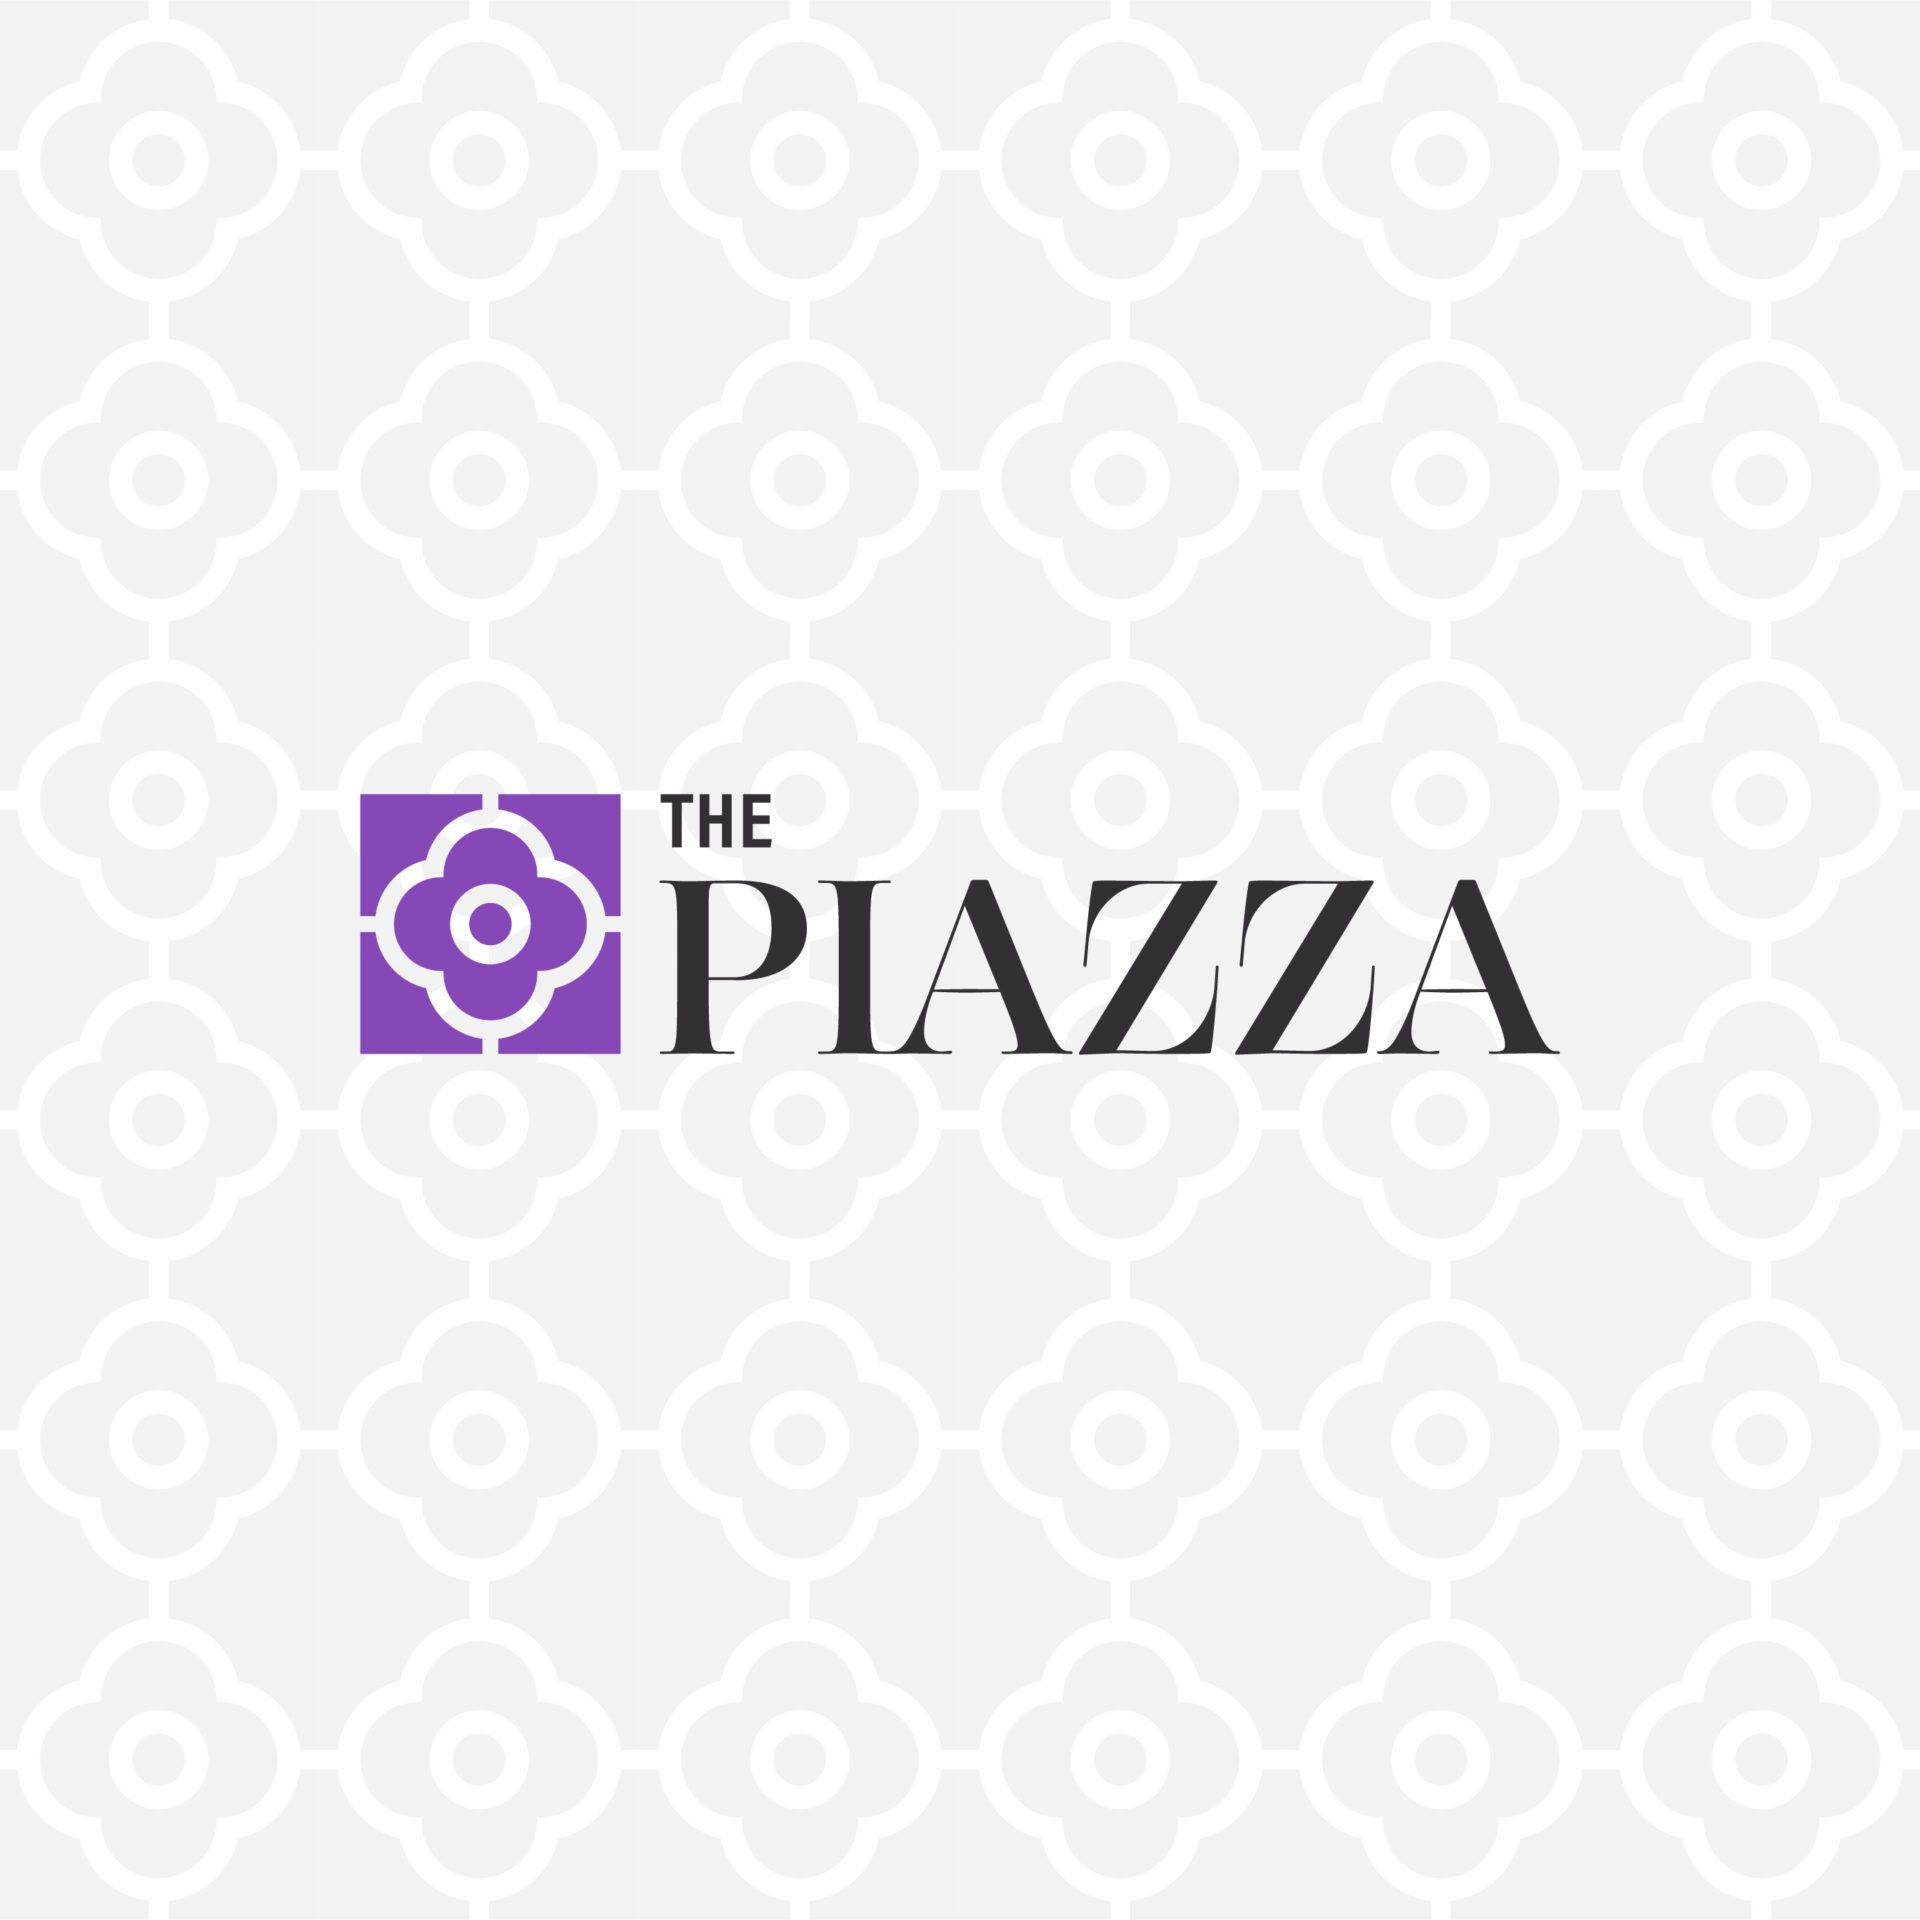 "The Piazza" Logo over Brand Pattern